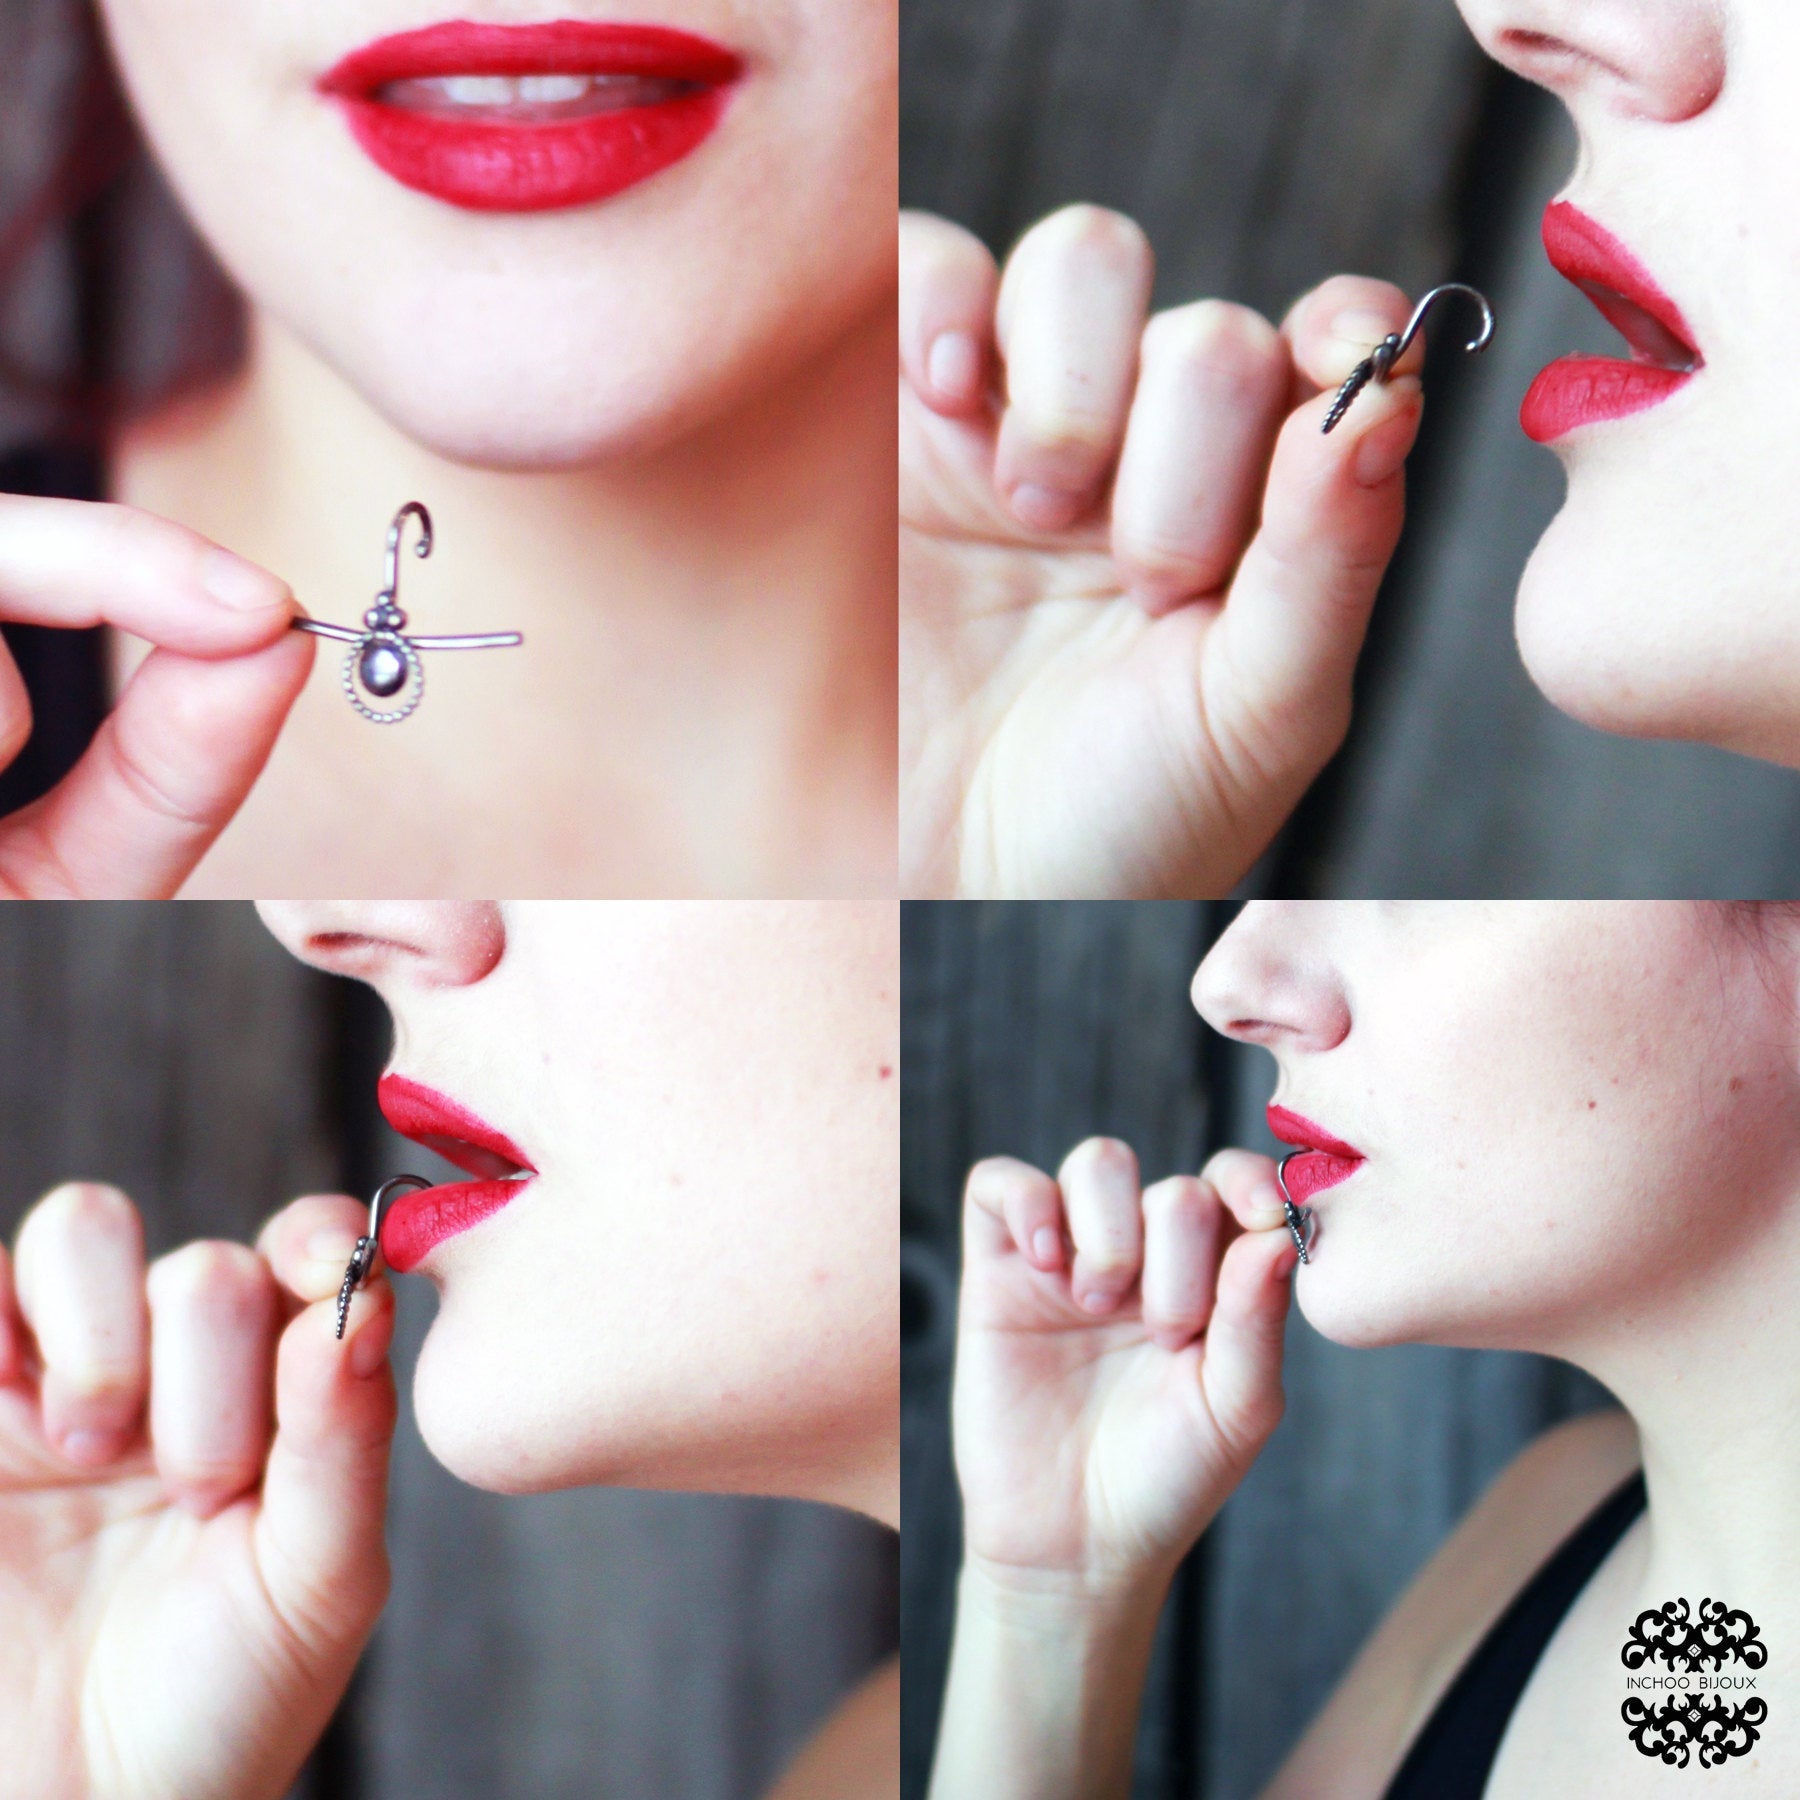 How To Put on our Fake Lip Rings